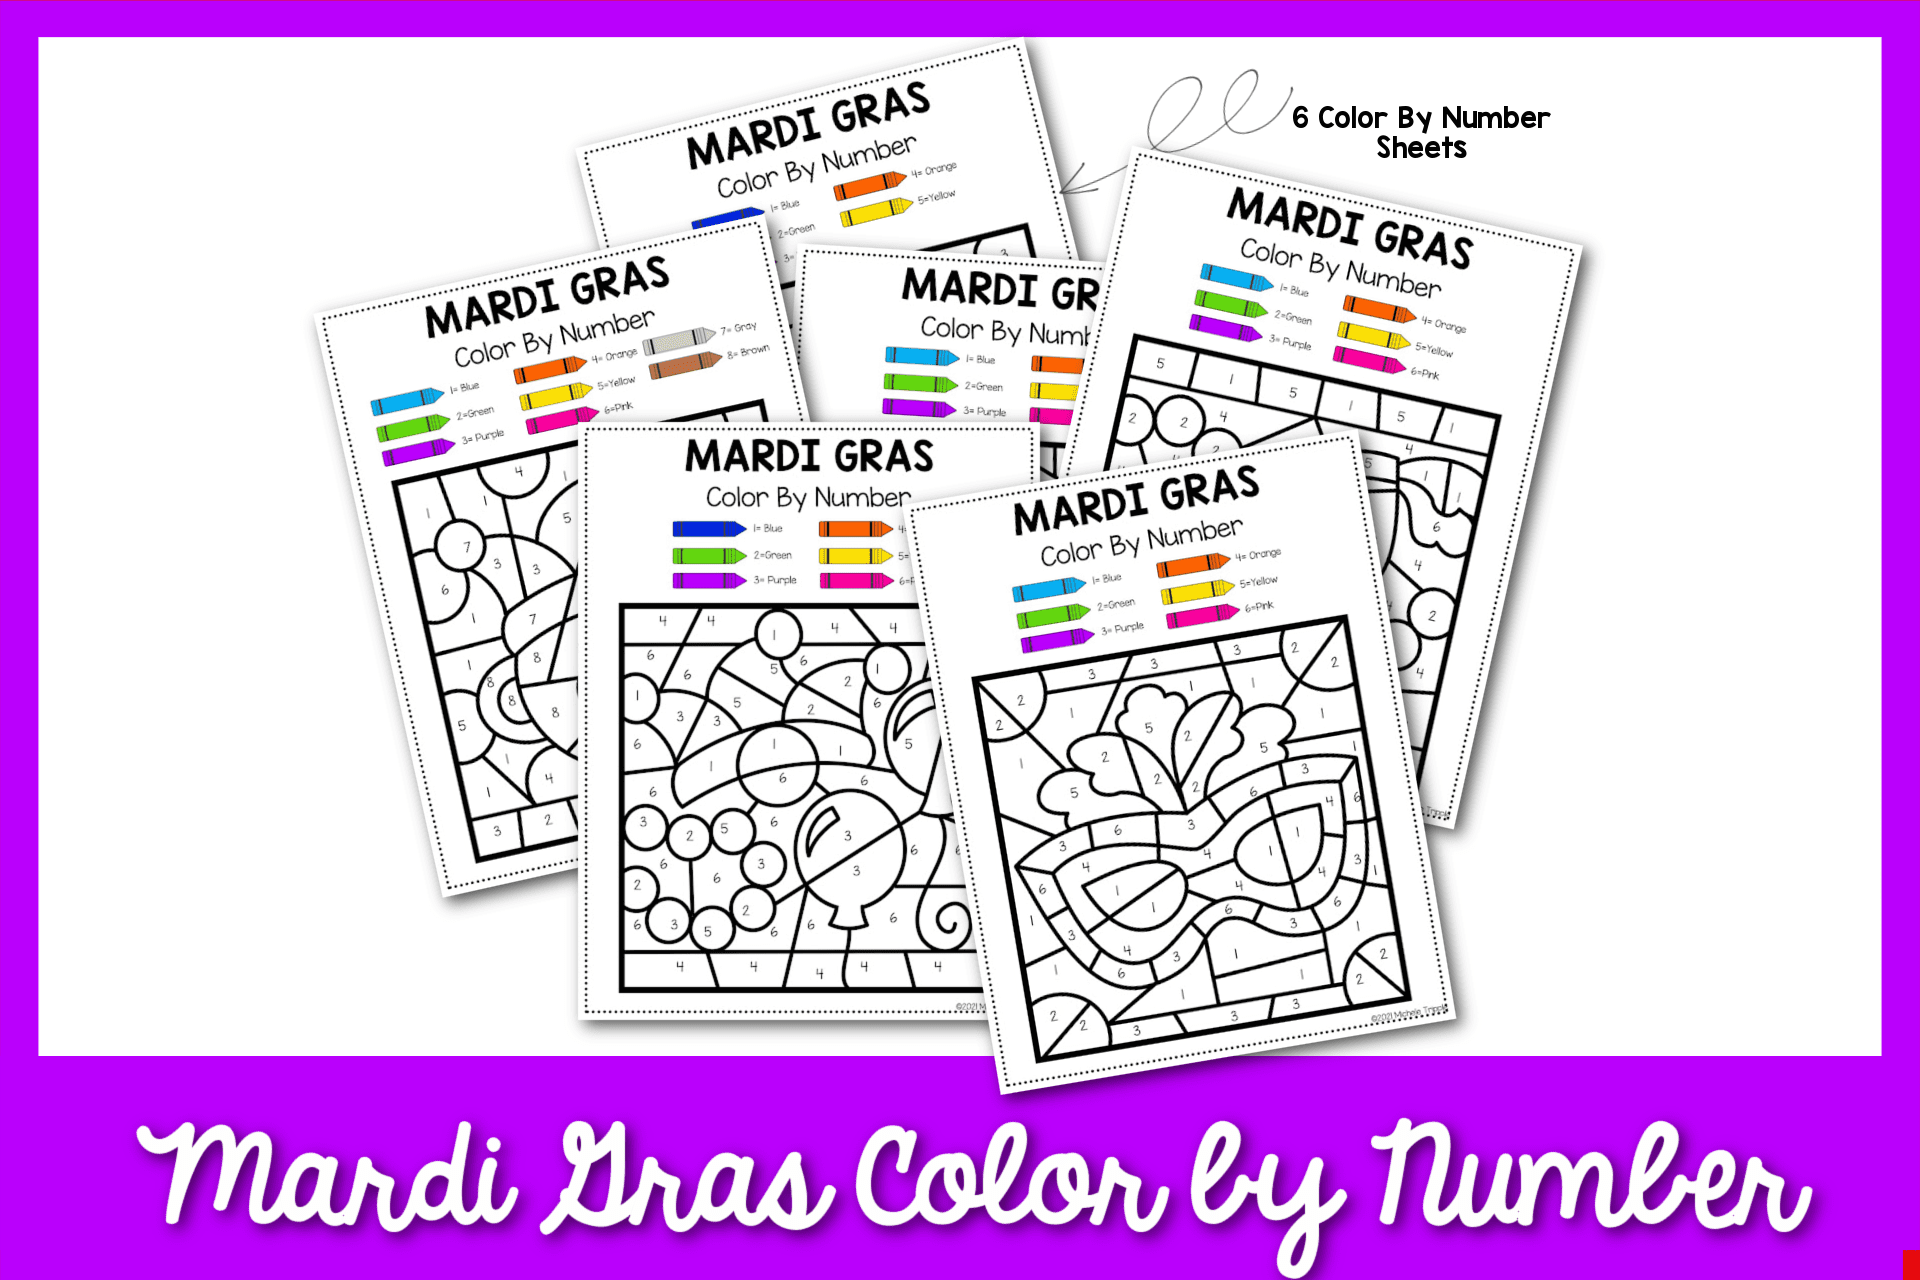 Feature: Mardi Gras Color By number sheets with purple border